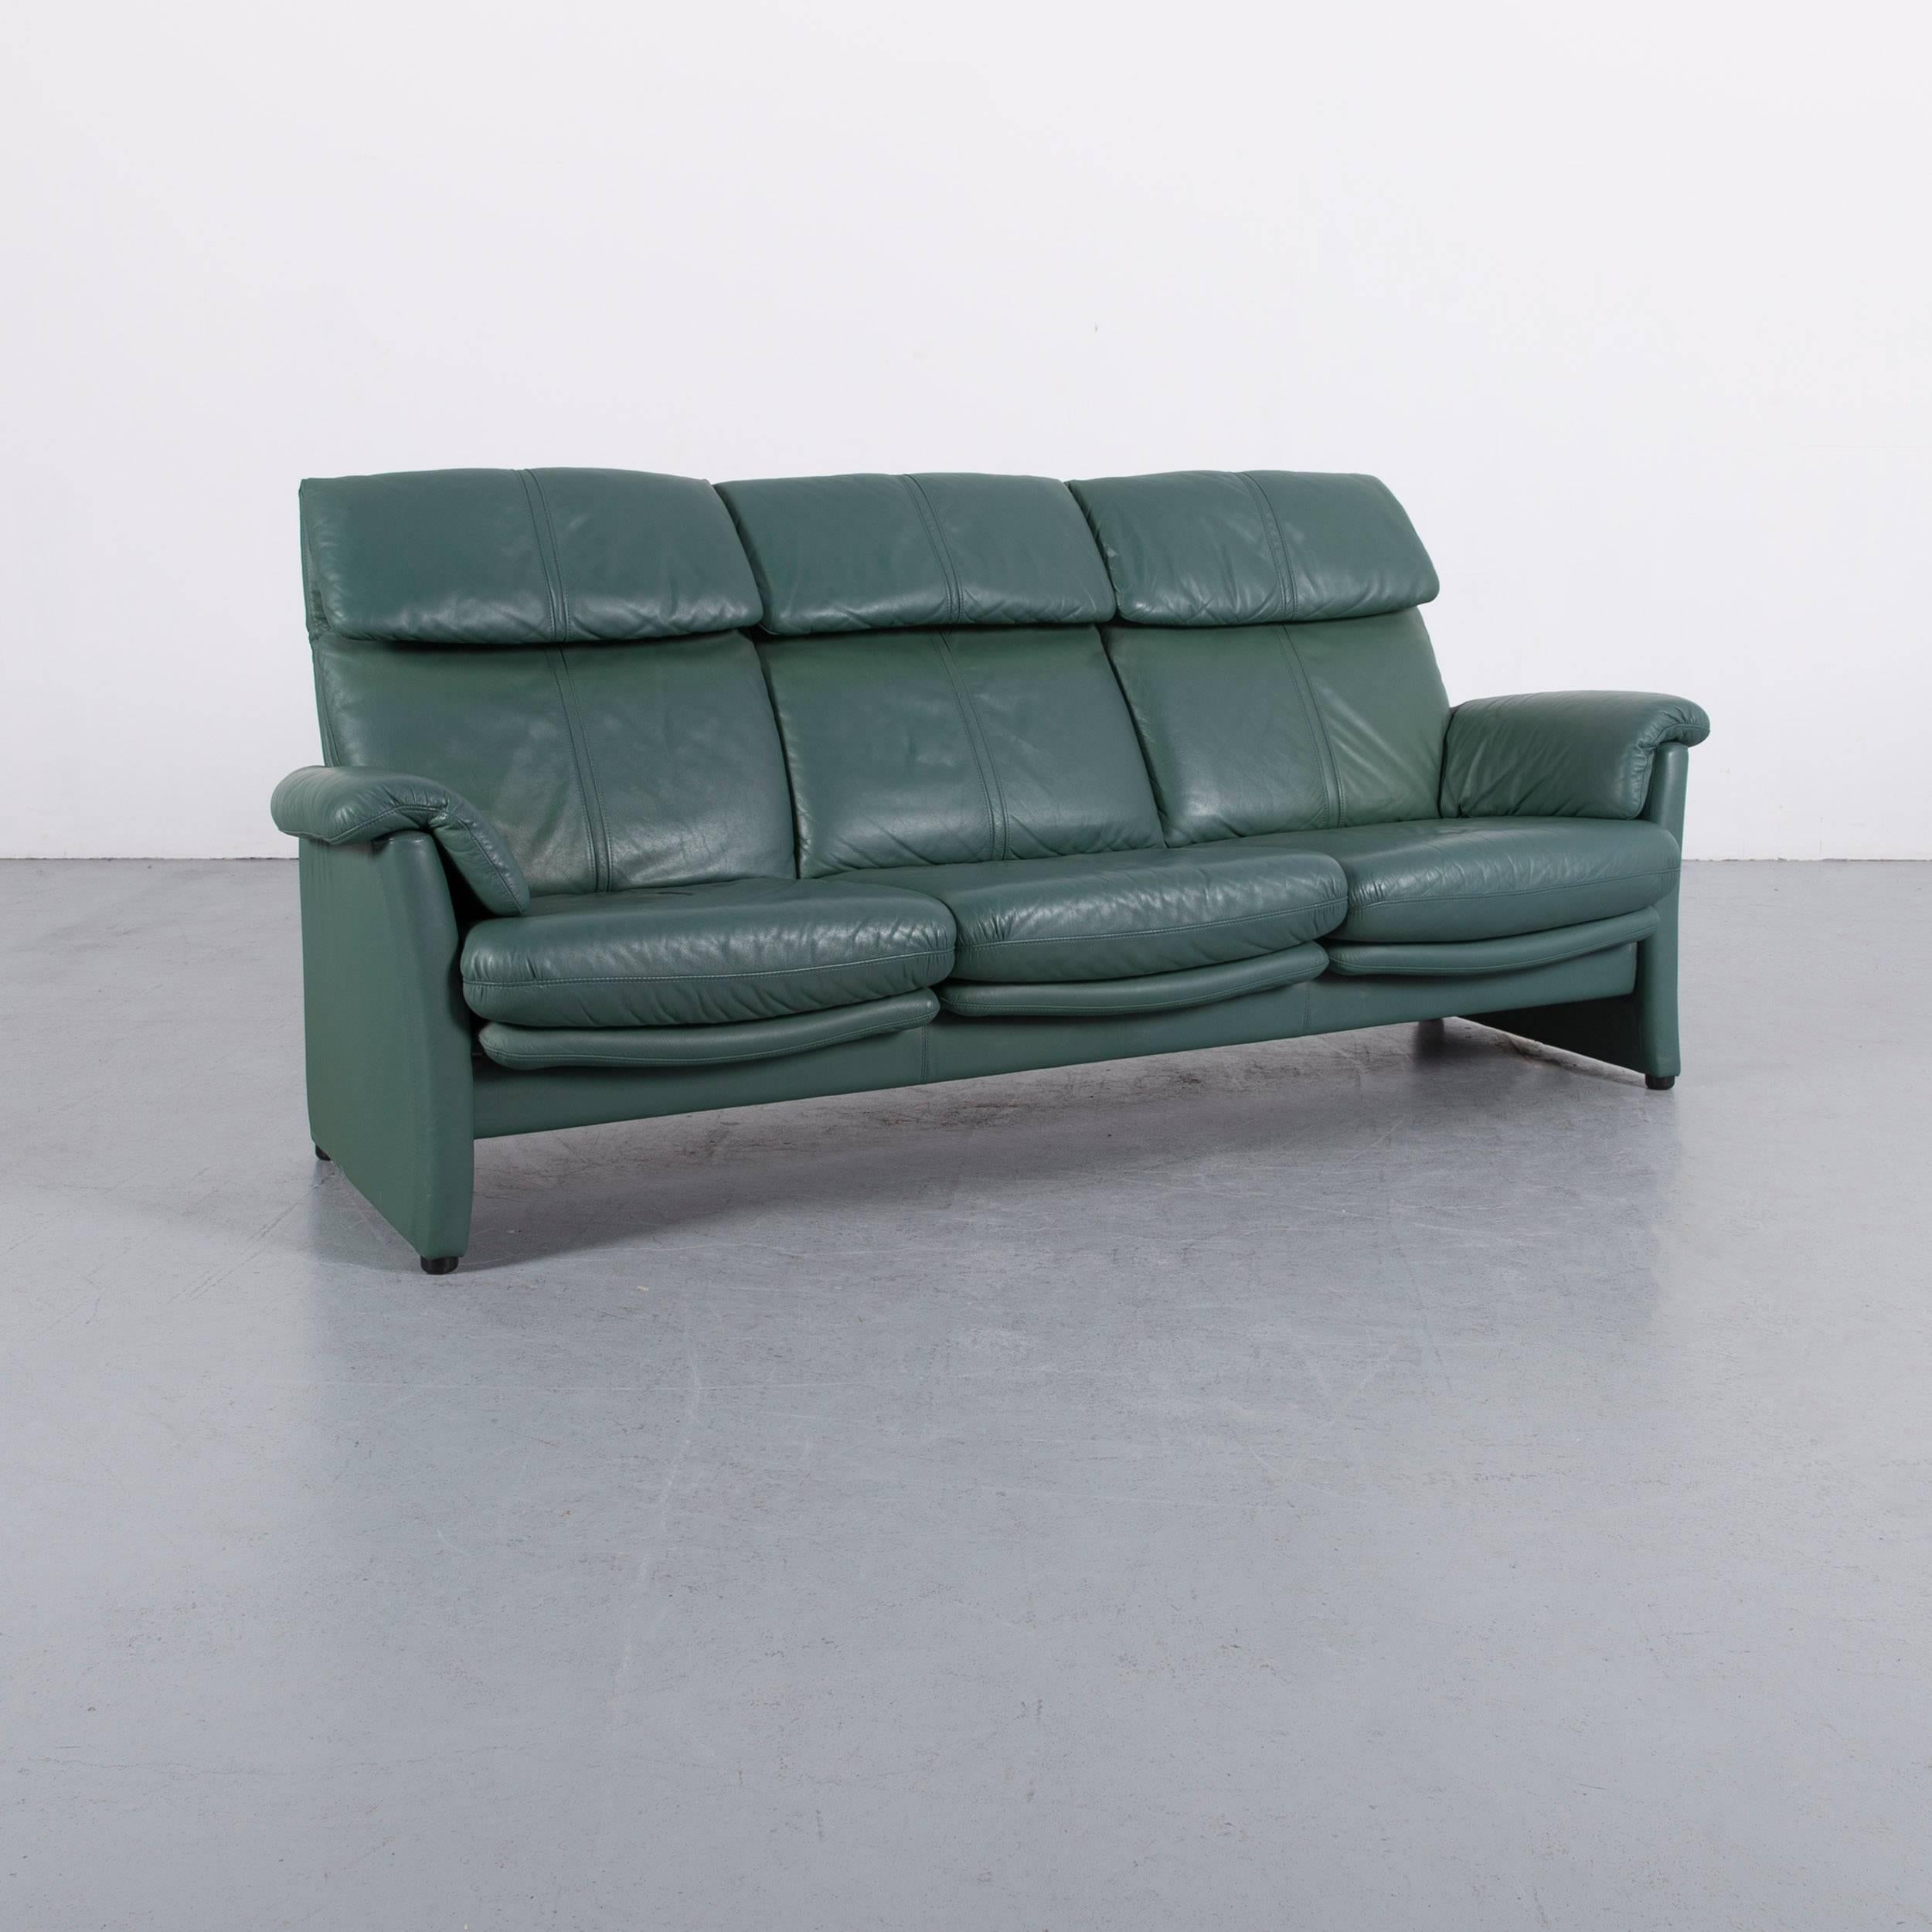 We bring to you an Ewald Schillig leather sofa green blue three-seat.































.